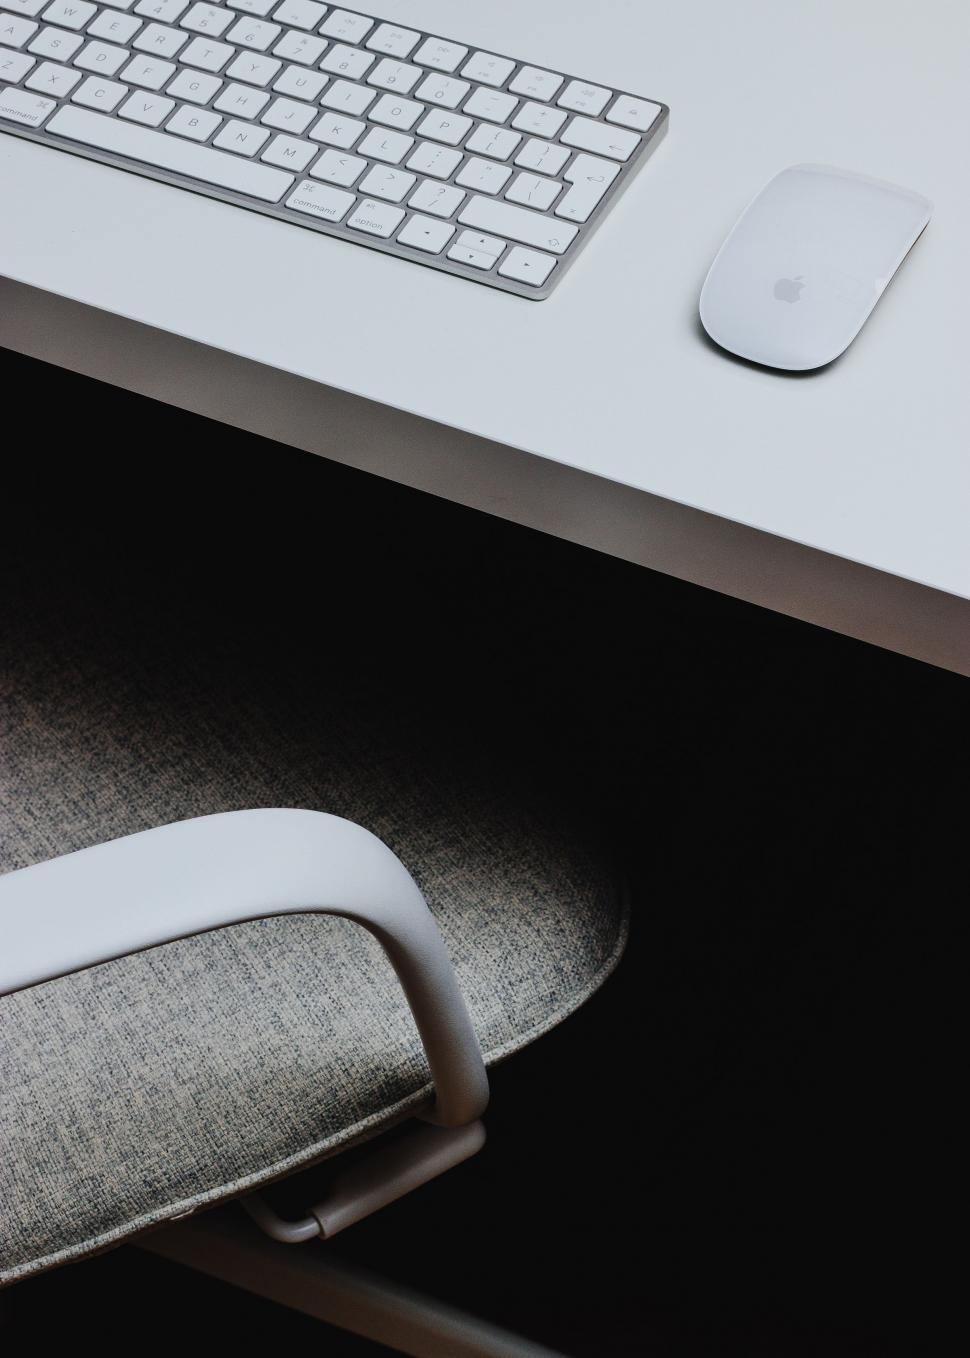 Free Image of Organized Computer Desk With Keyboard and Mouse 